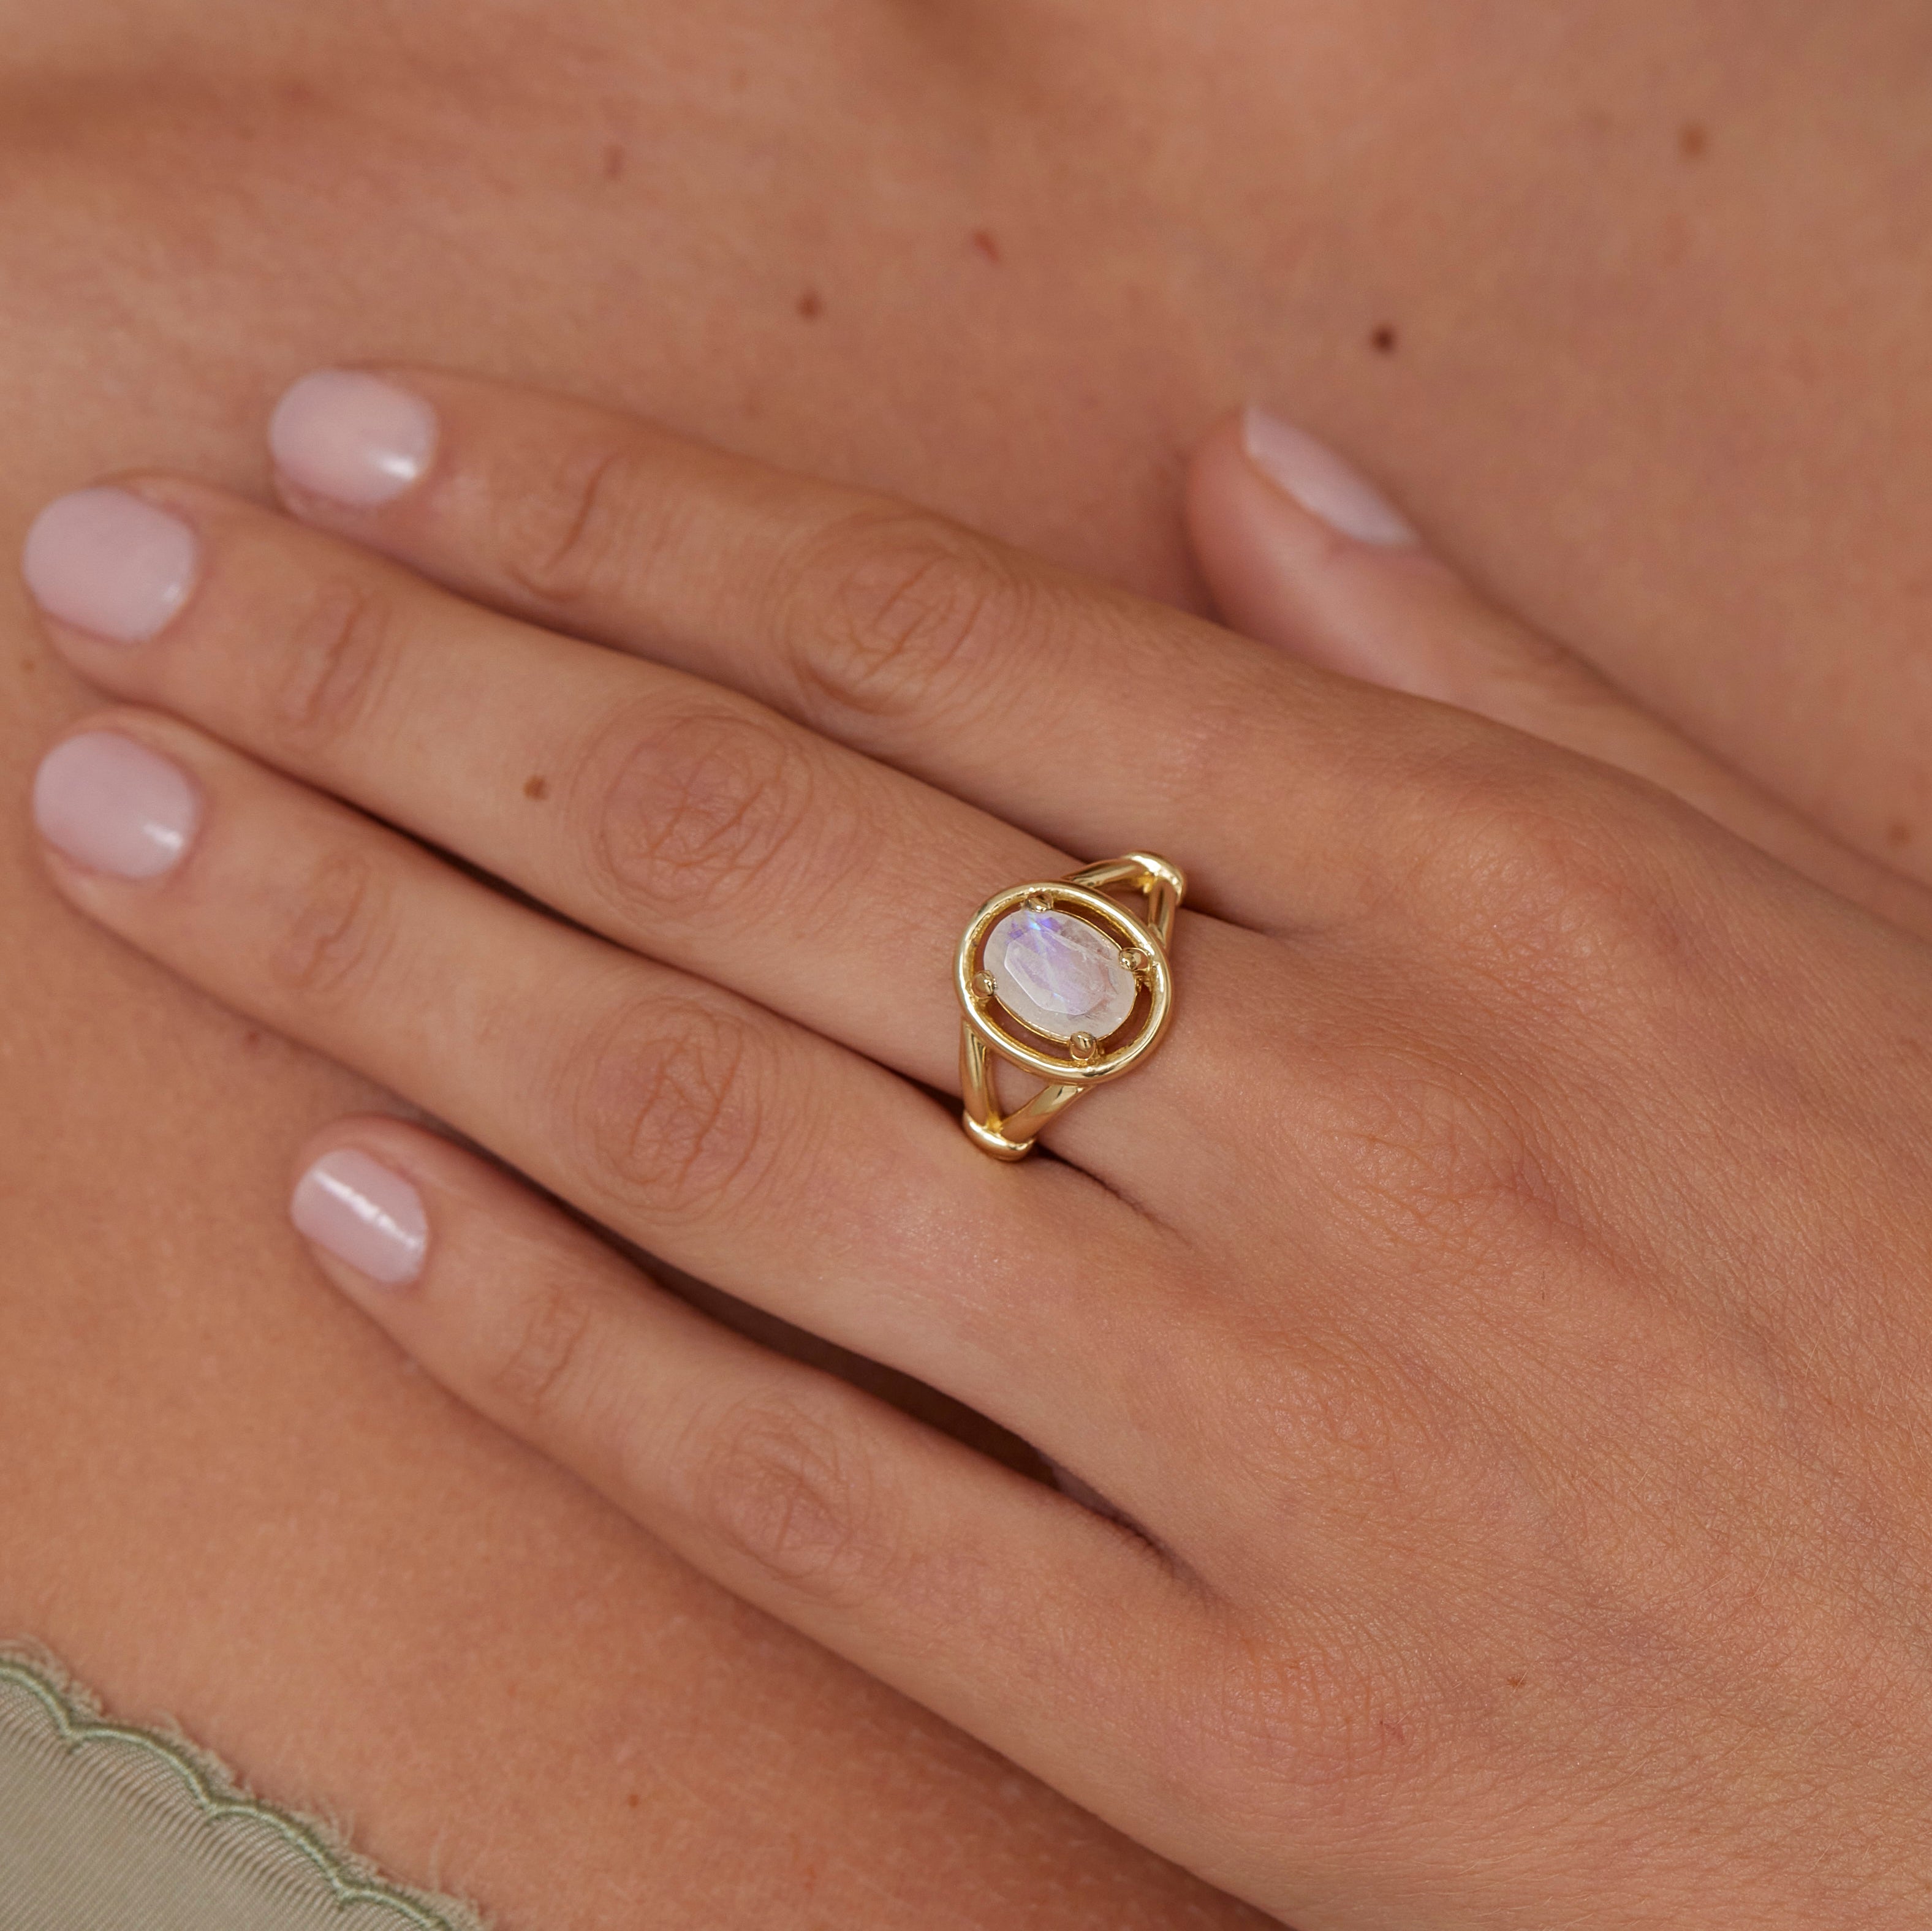 The Halo Gold Ring